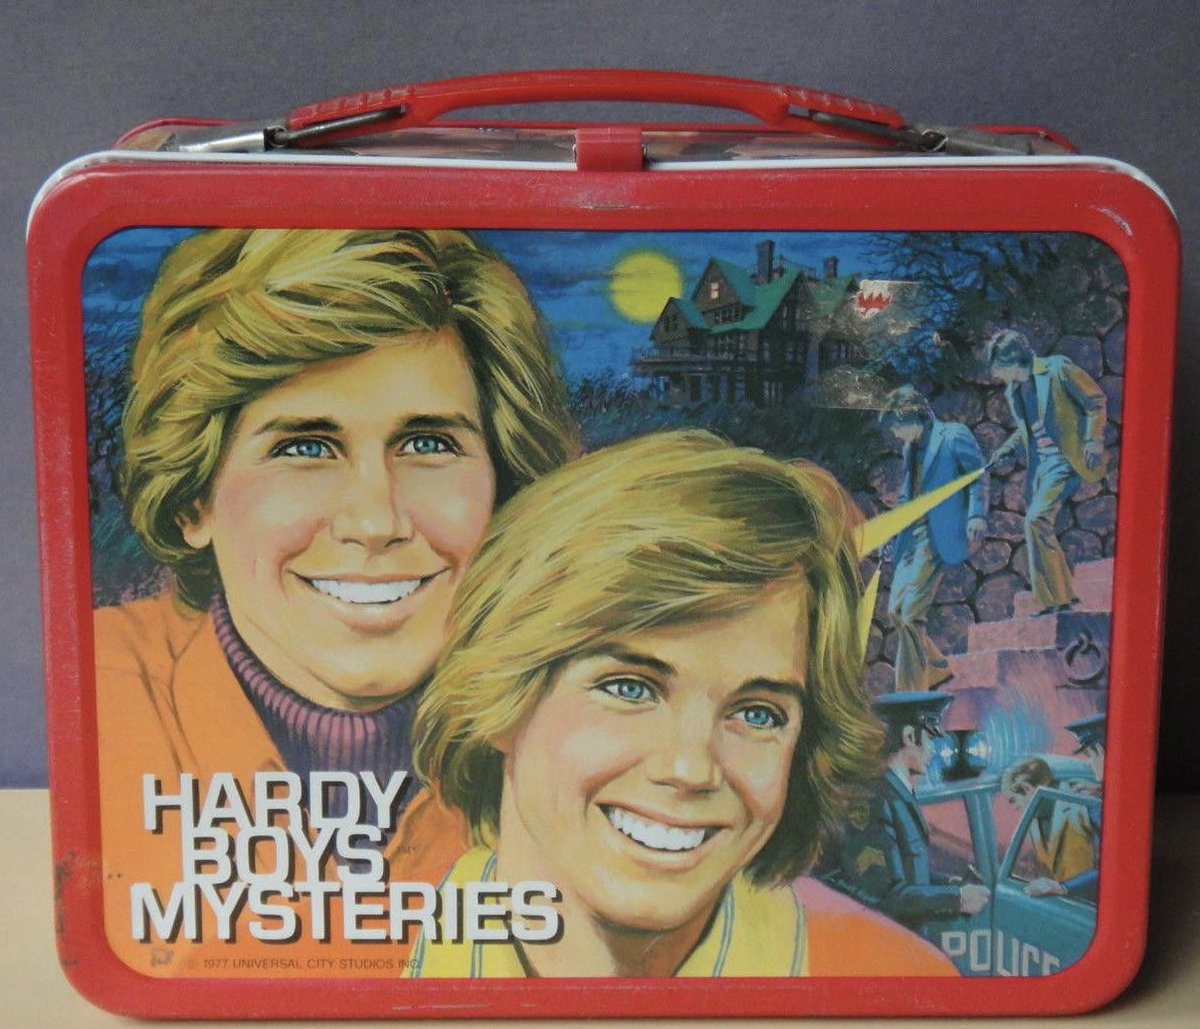 Lunchtime with the Hardy Boys today. Parker Stevenson & Shaun Cassidy. (1977) It’s possible there may be a mystery to solve. #lunch #lunchbox #1970s #lunchtime #vintage #classic #HardyBoys #mystery #nostalgia #backintheday